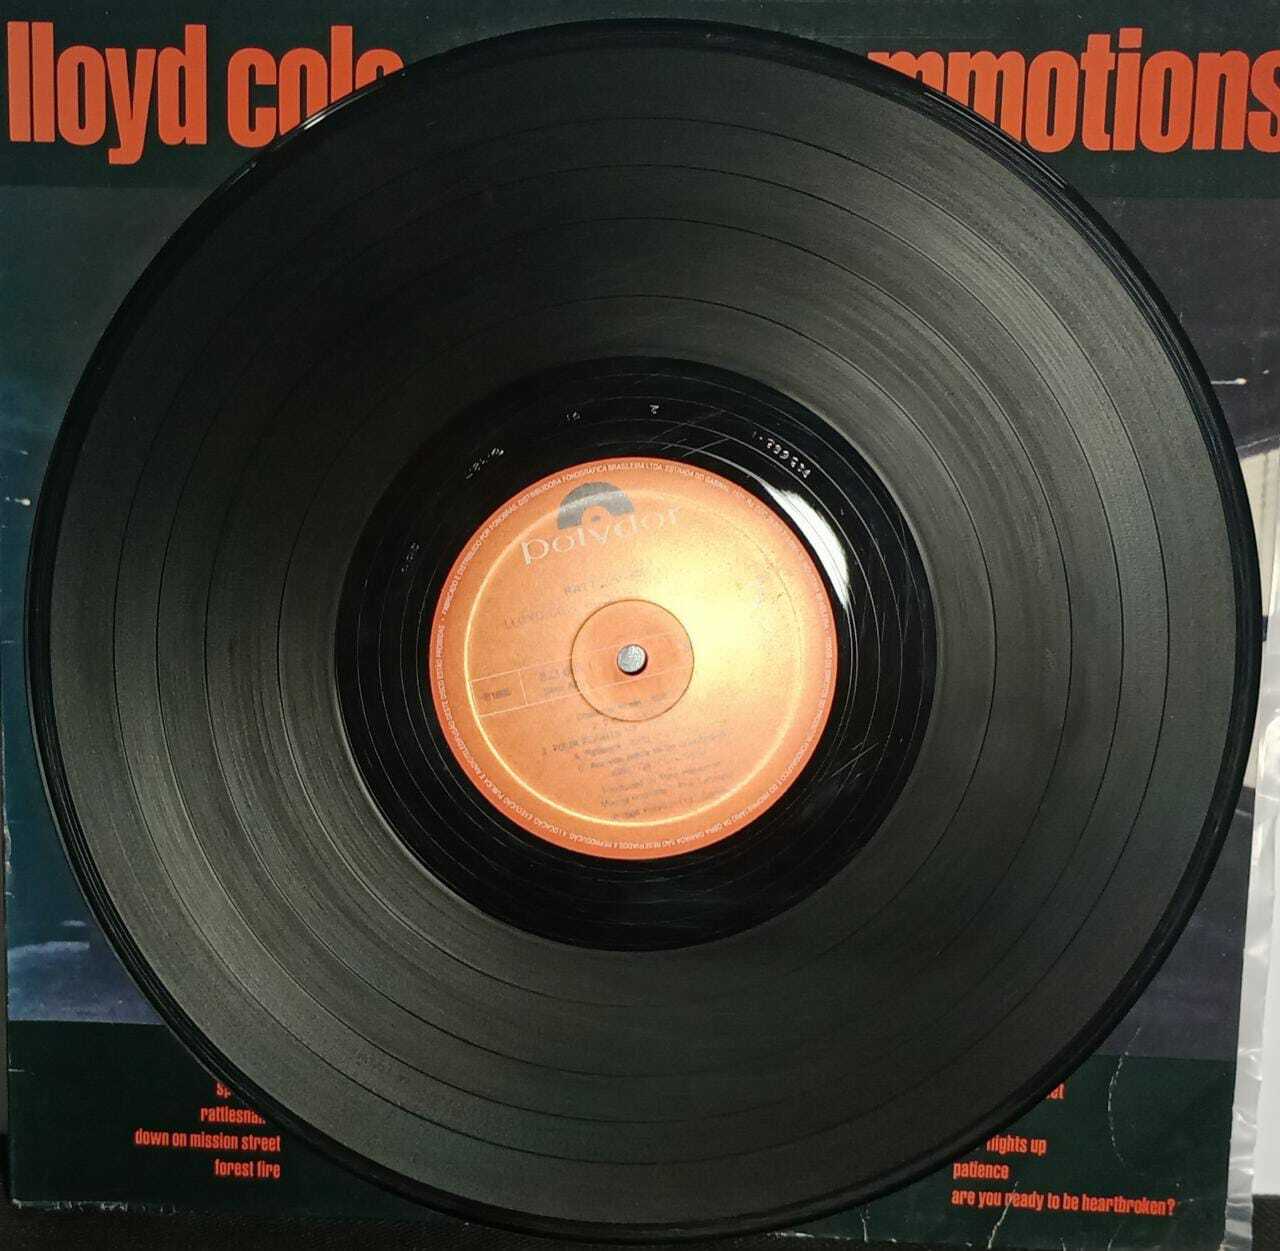 Vinil - Lloyd Cole and the Commotions - Rattlesnakes